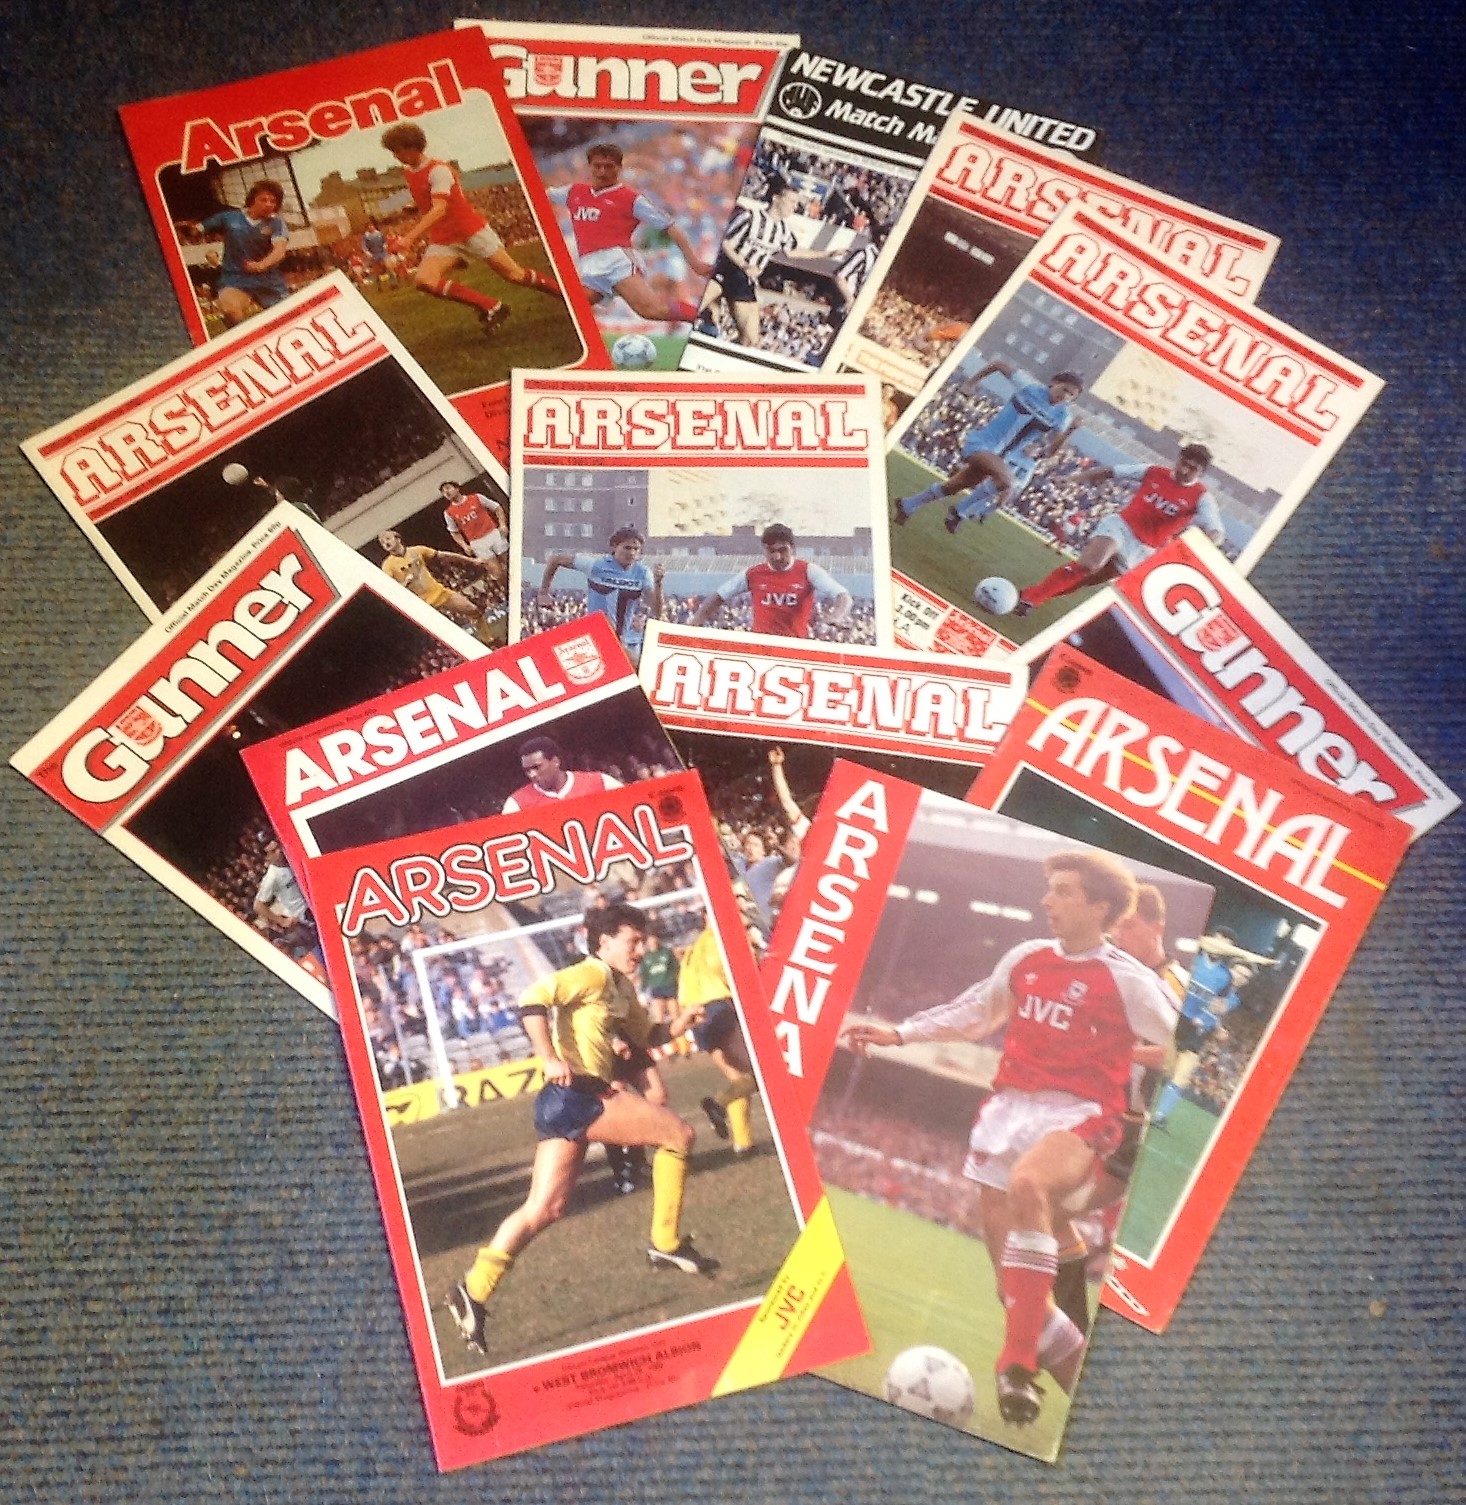 Football Arsenal vintage programme collection 15 programmes dating back to the eighties. Good